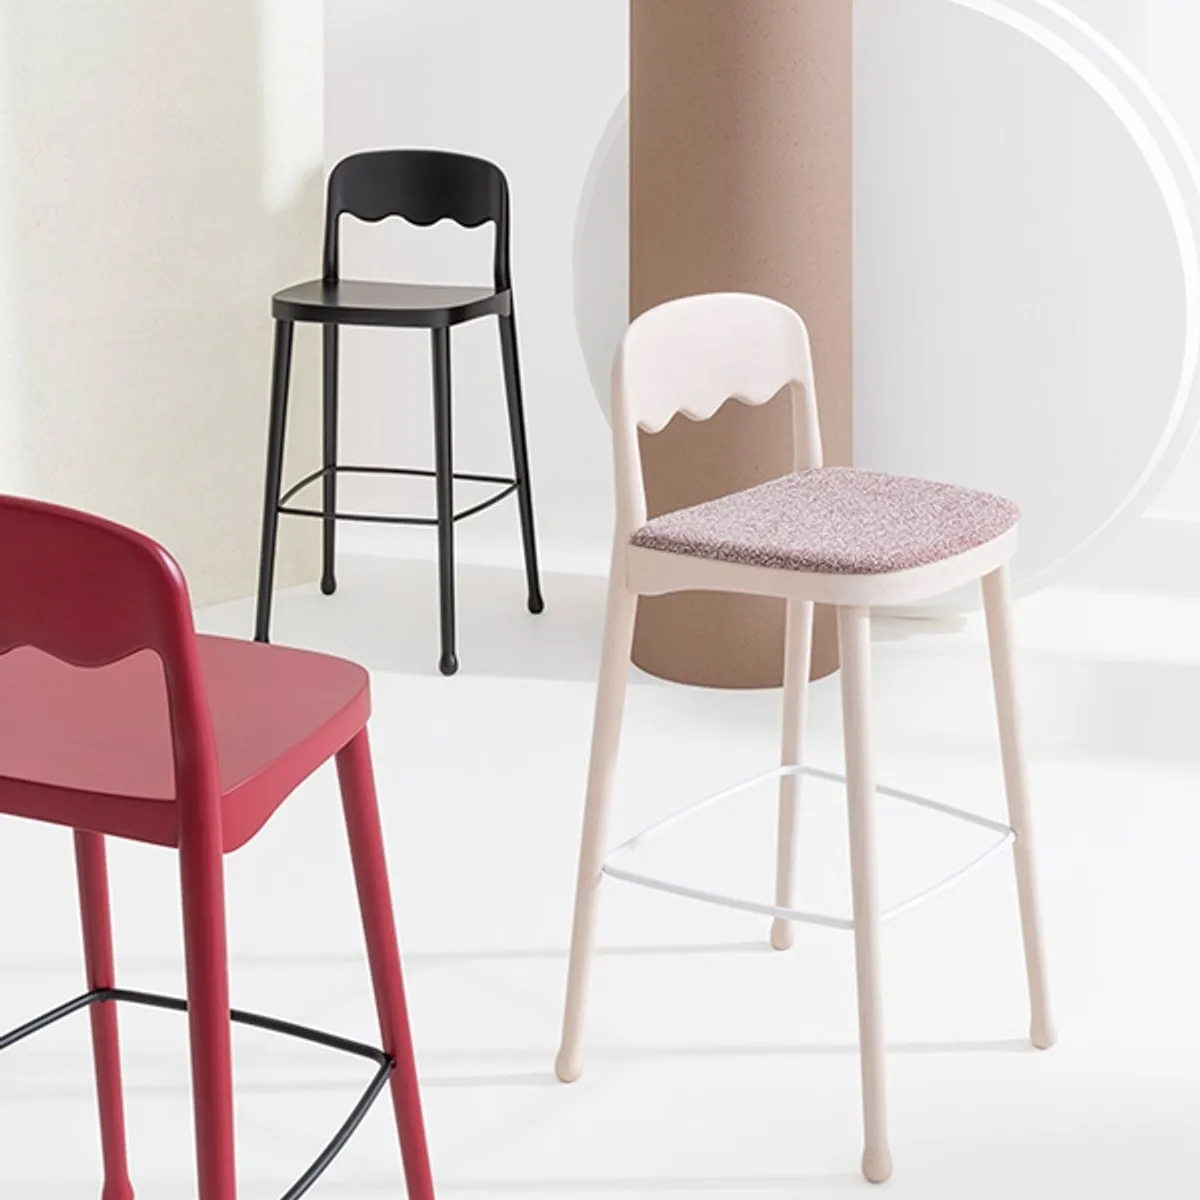 Frisée bar stool Inside Out Contracts